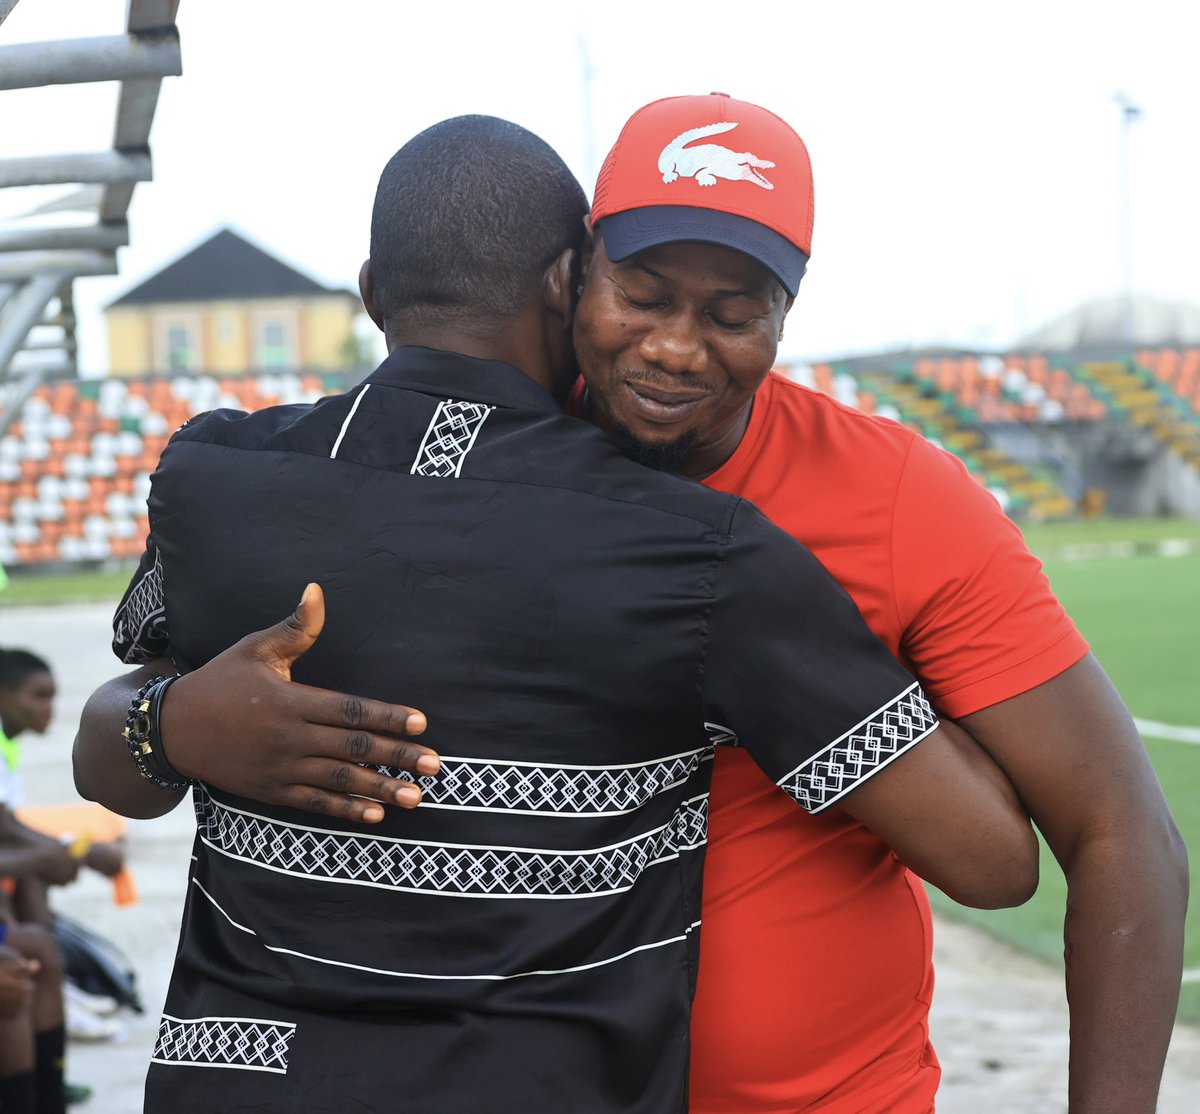 Our former coach @yemastarcoach showed his support for the team in our 0-0 draw to 1472 FC on Sunday. #vfc #vandrezzerfc